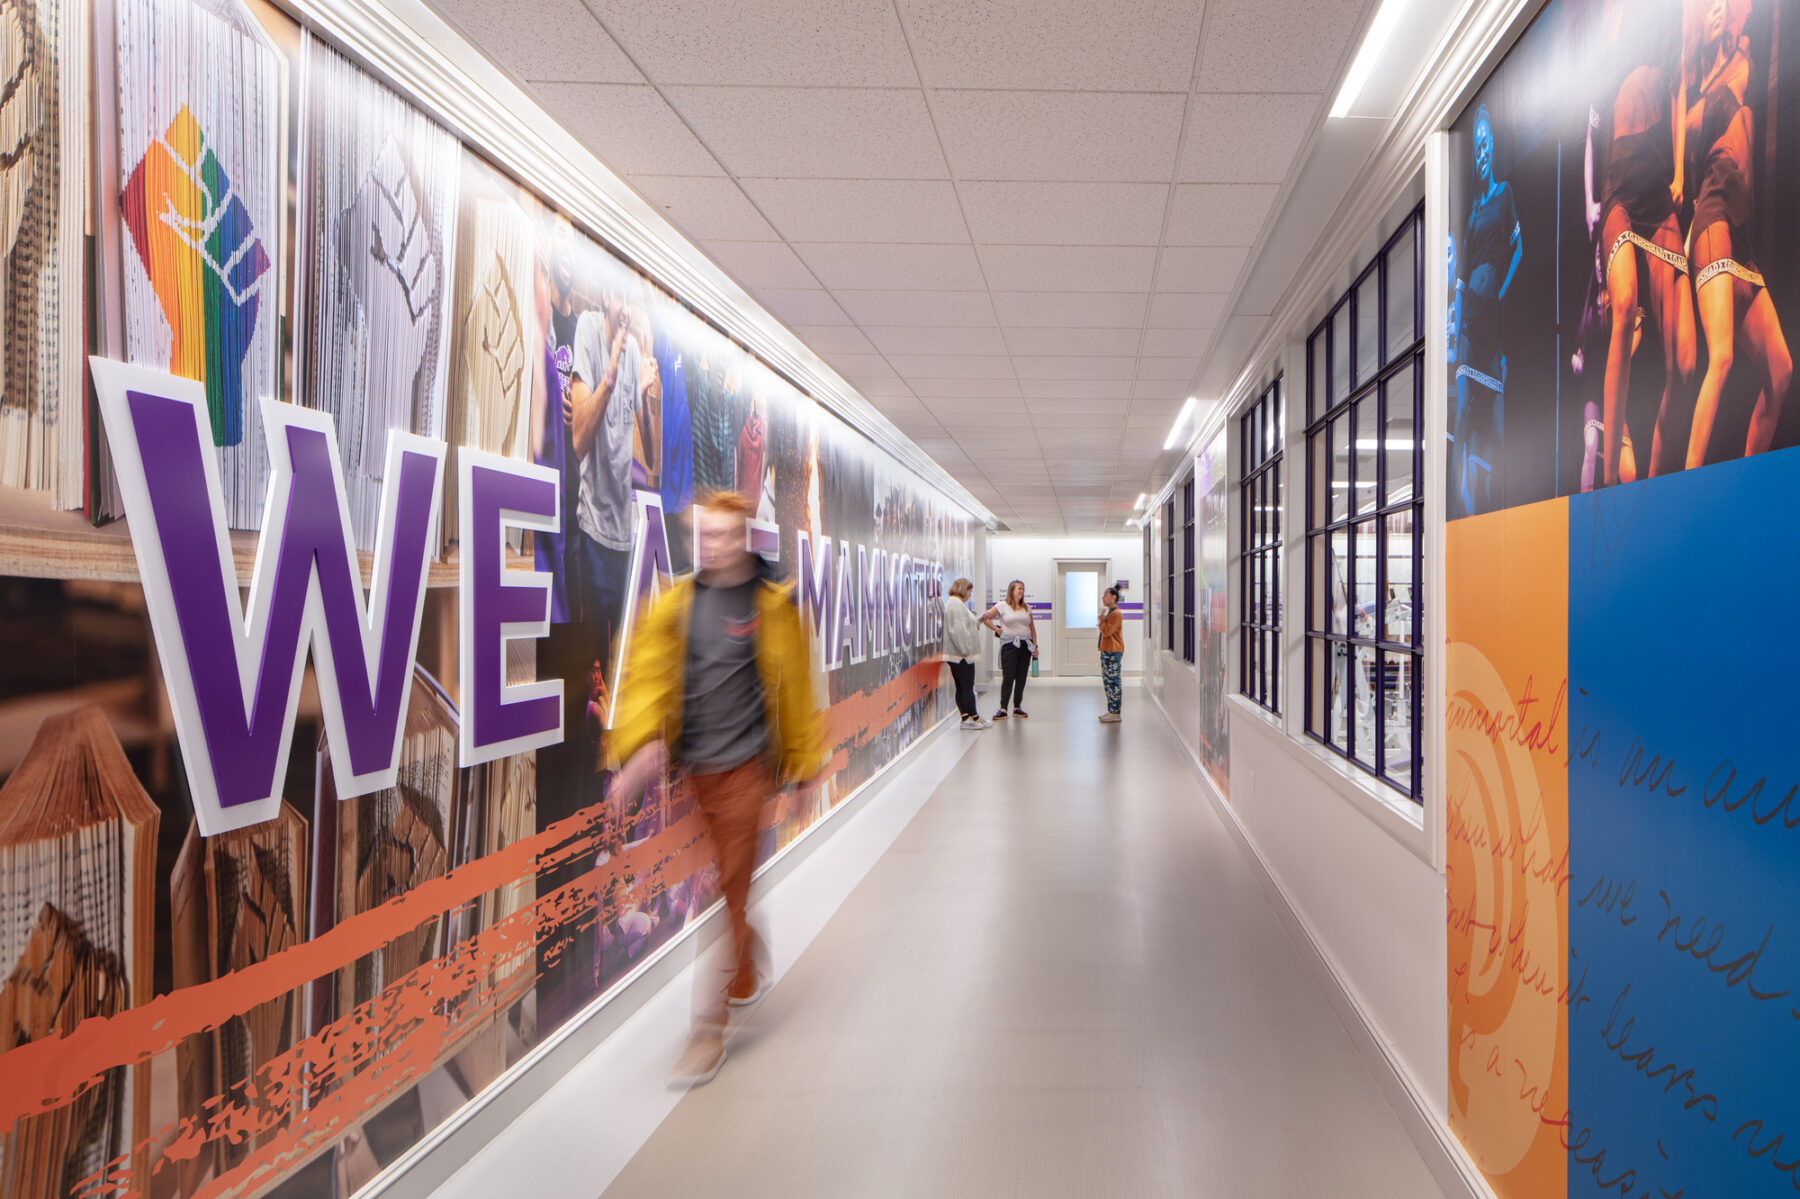 photograph of student walking down main corridor with glass windows on one side and custom graphics on the other